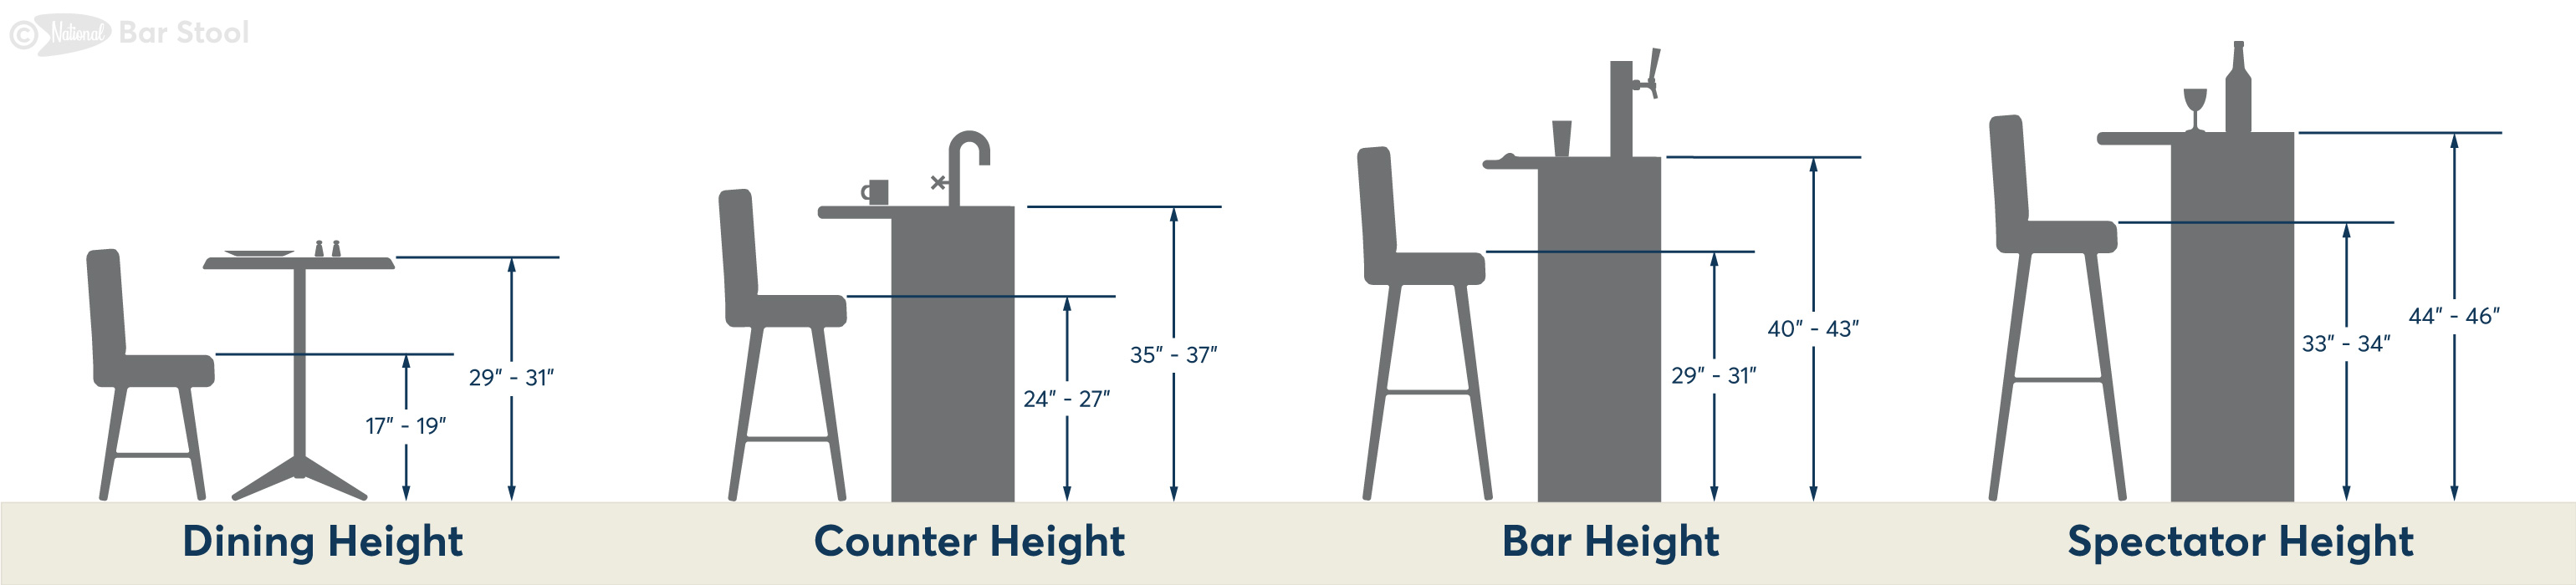 Bar Stool Ing Guide National, How To Choose The Right Bar Stool Height